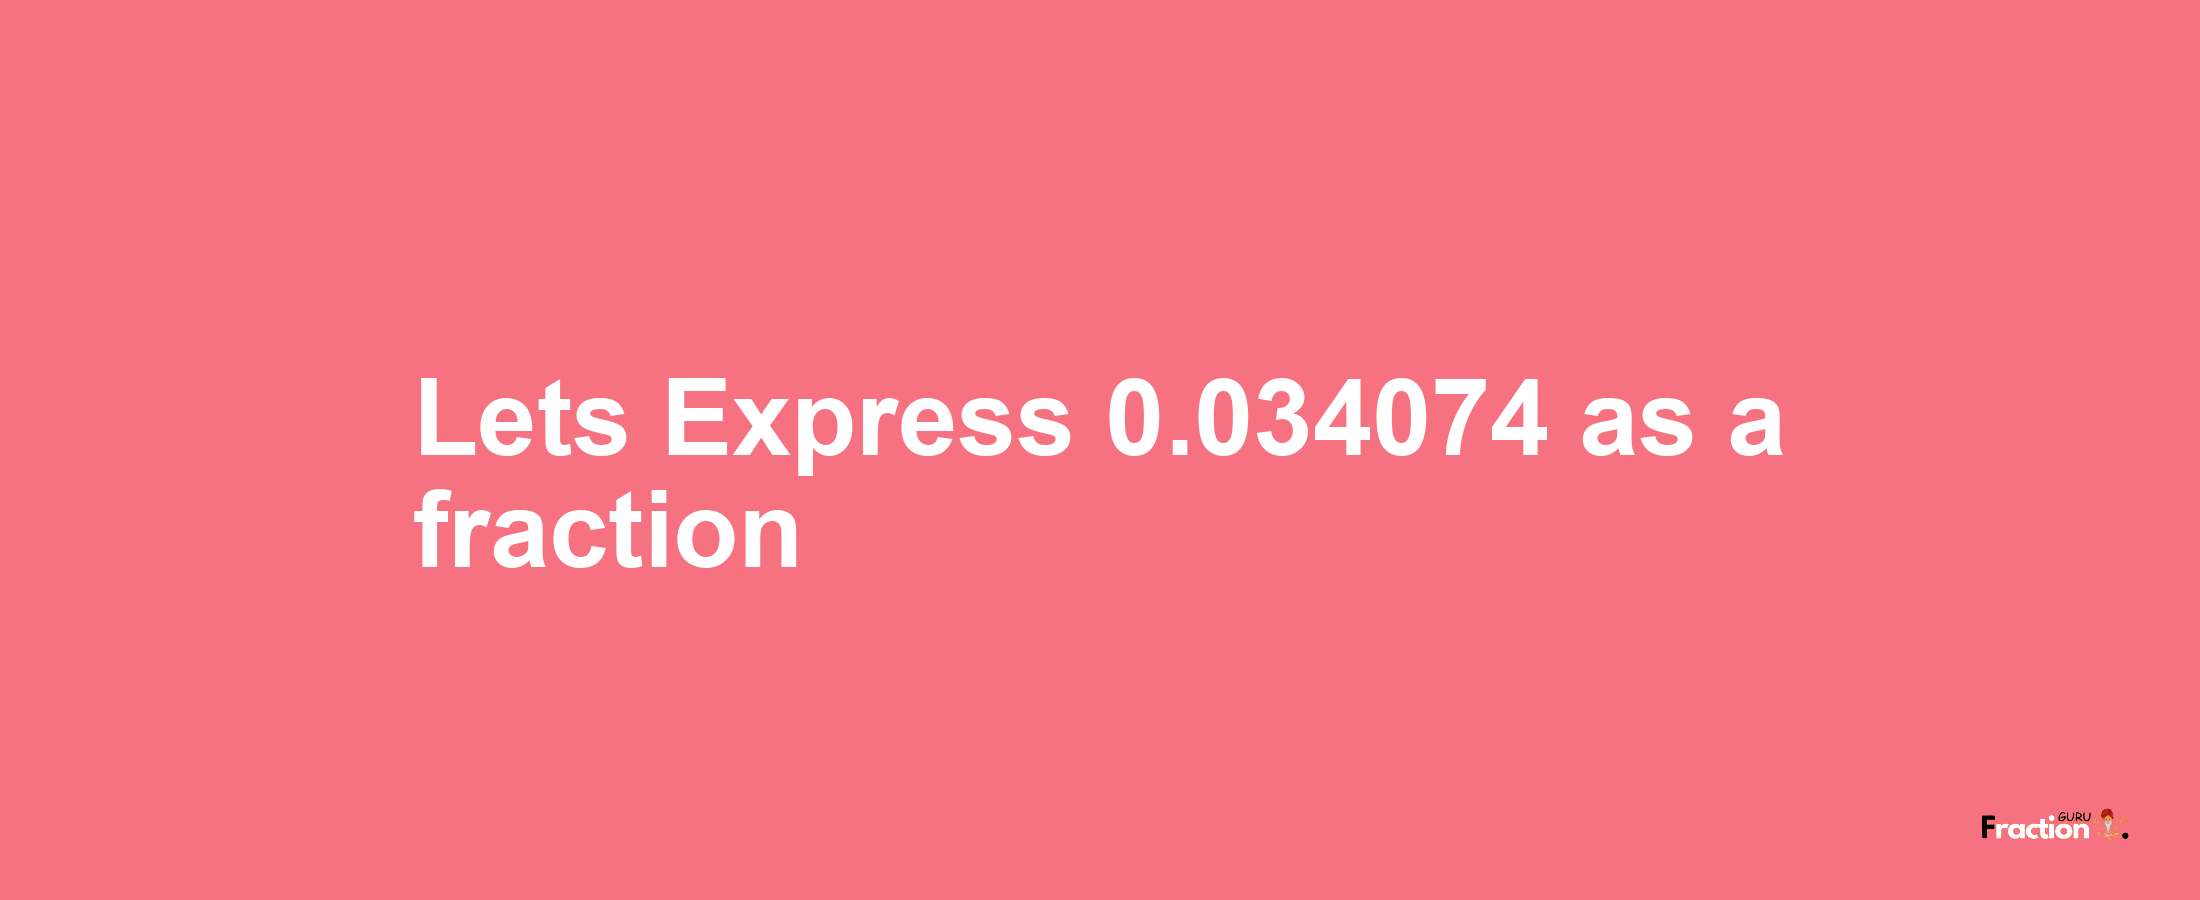 Lets Express 0.034074 as afraction